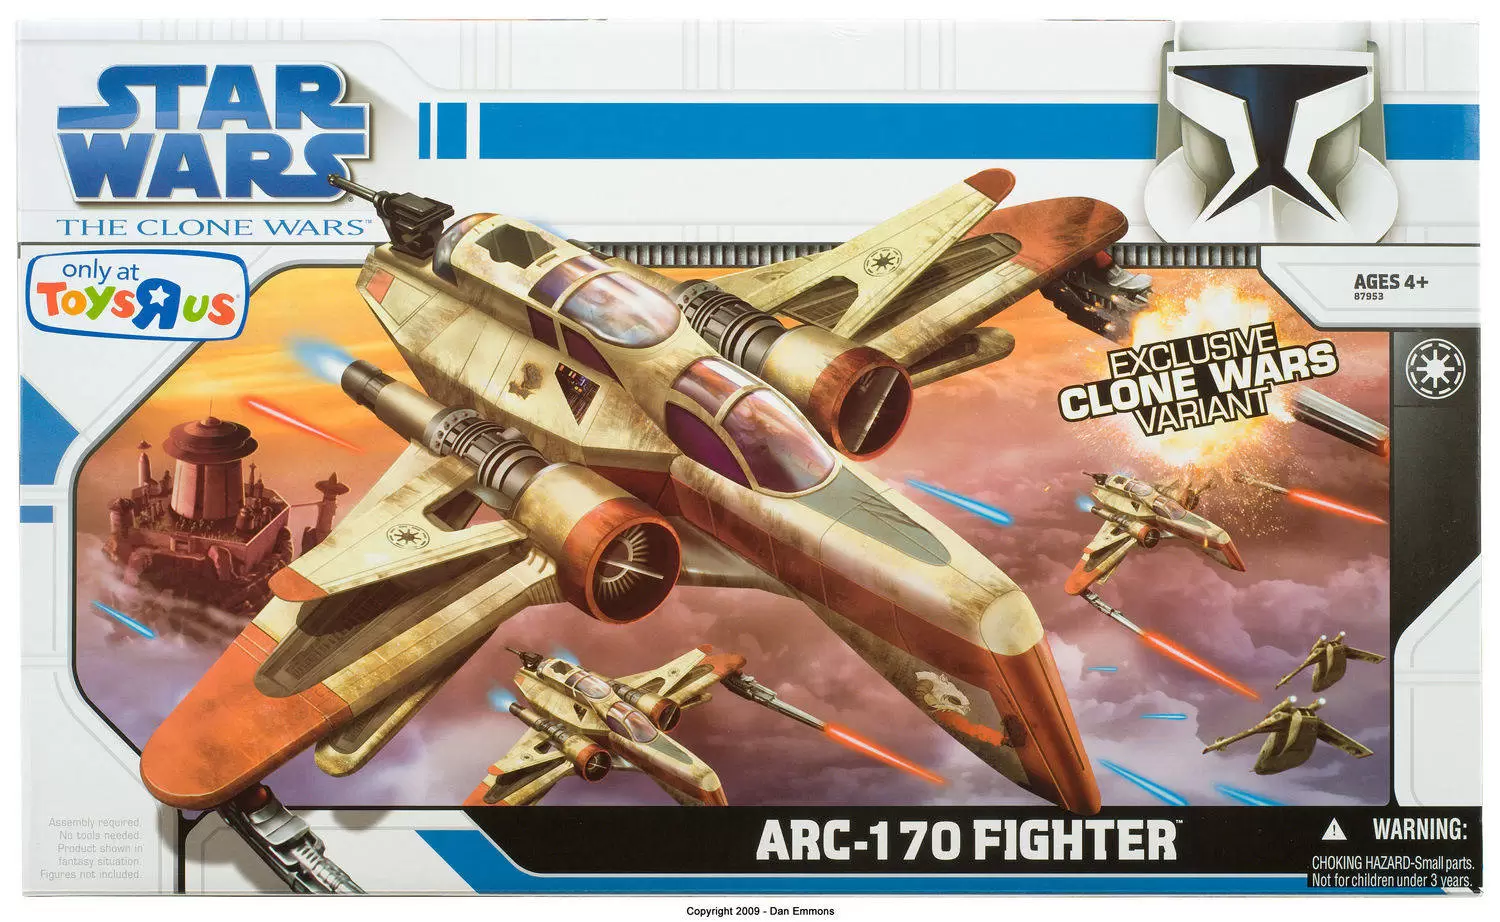 The Clone Wars (TCW 2008) - ARC-170 Fighter